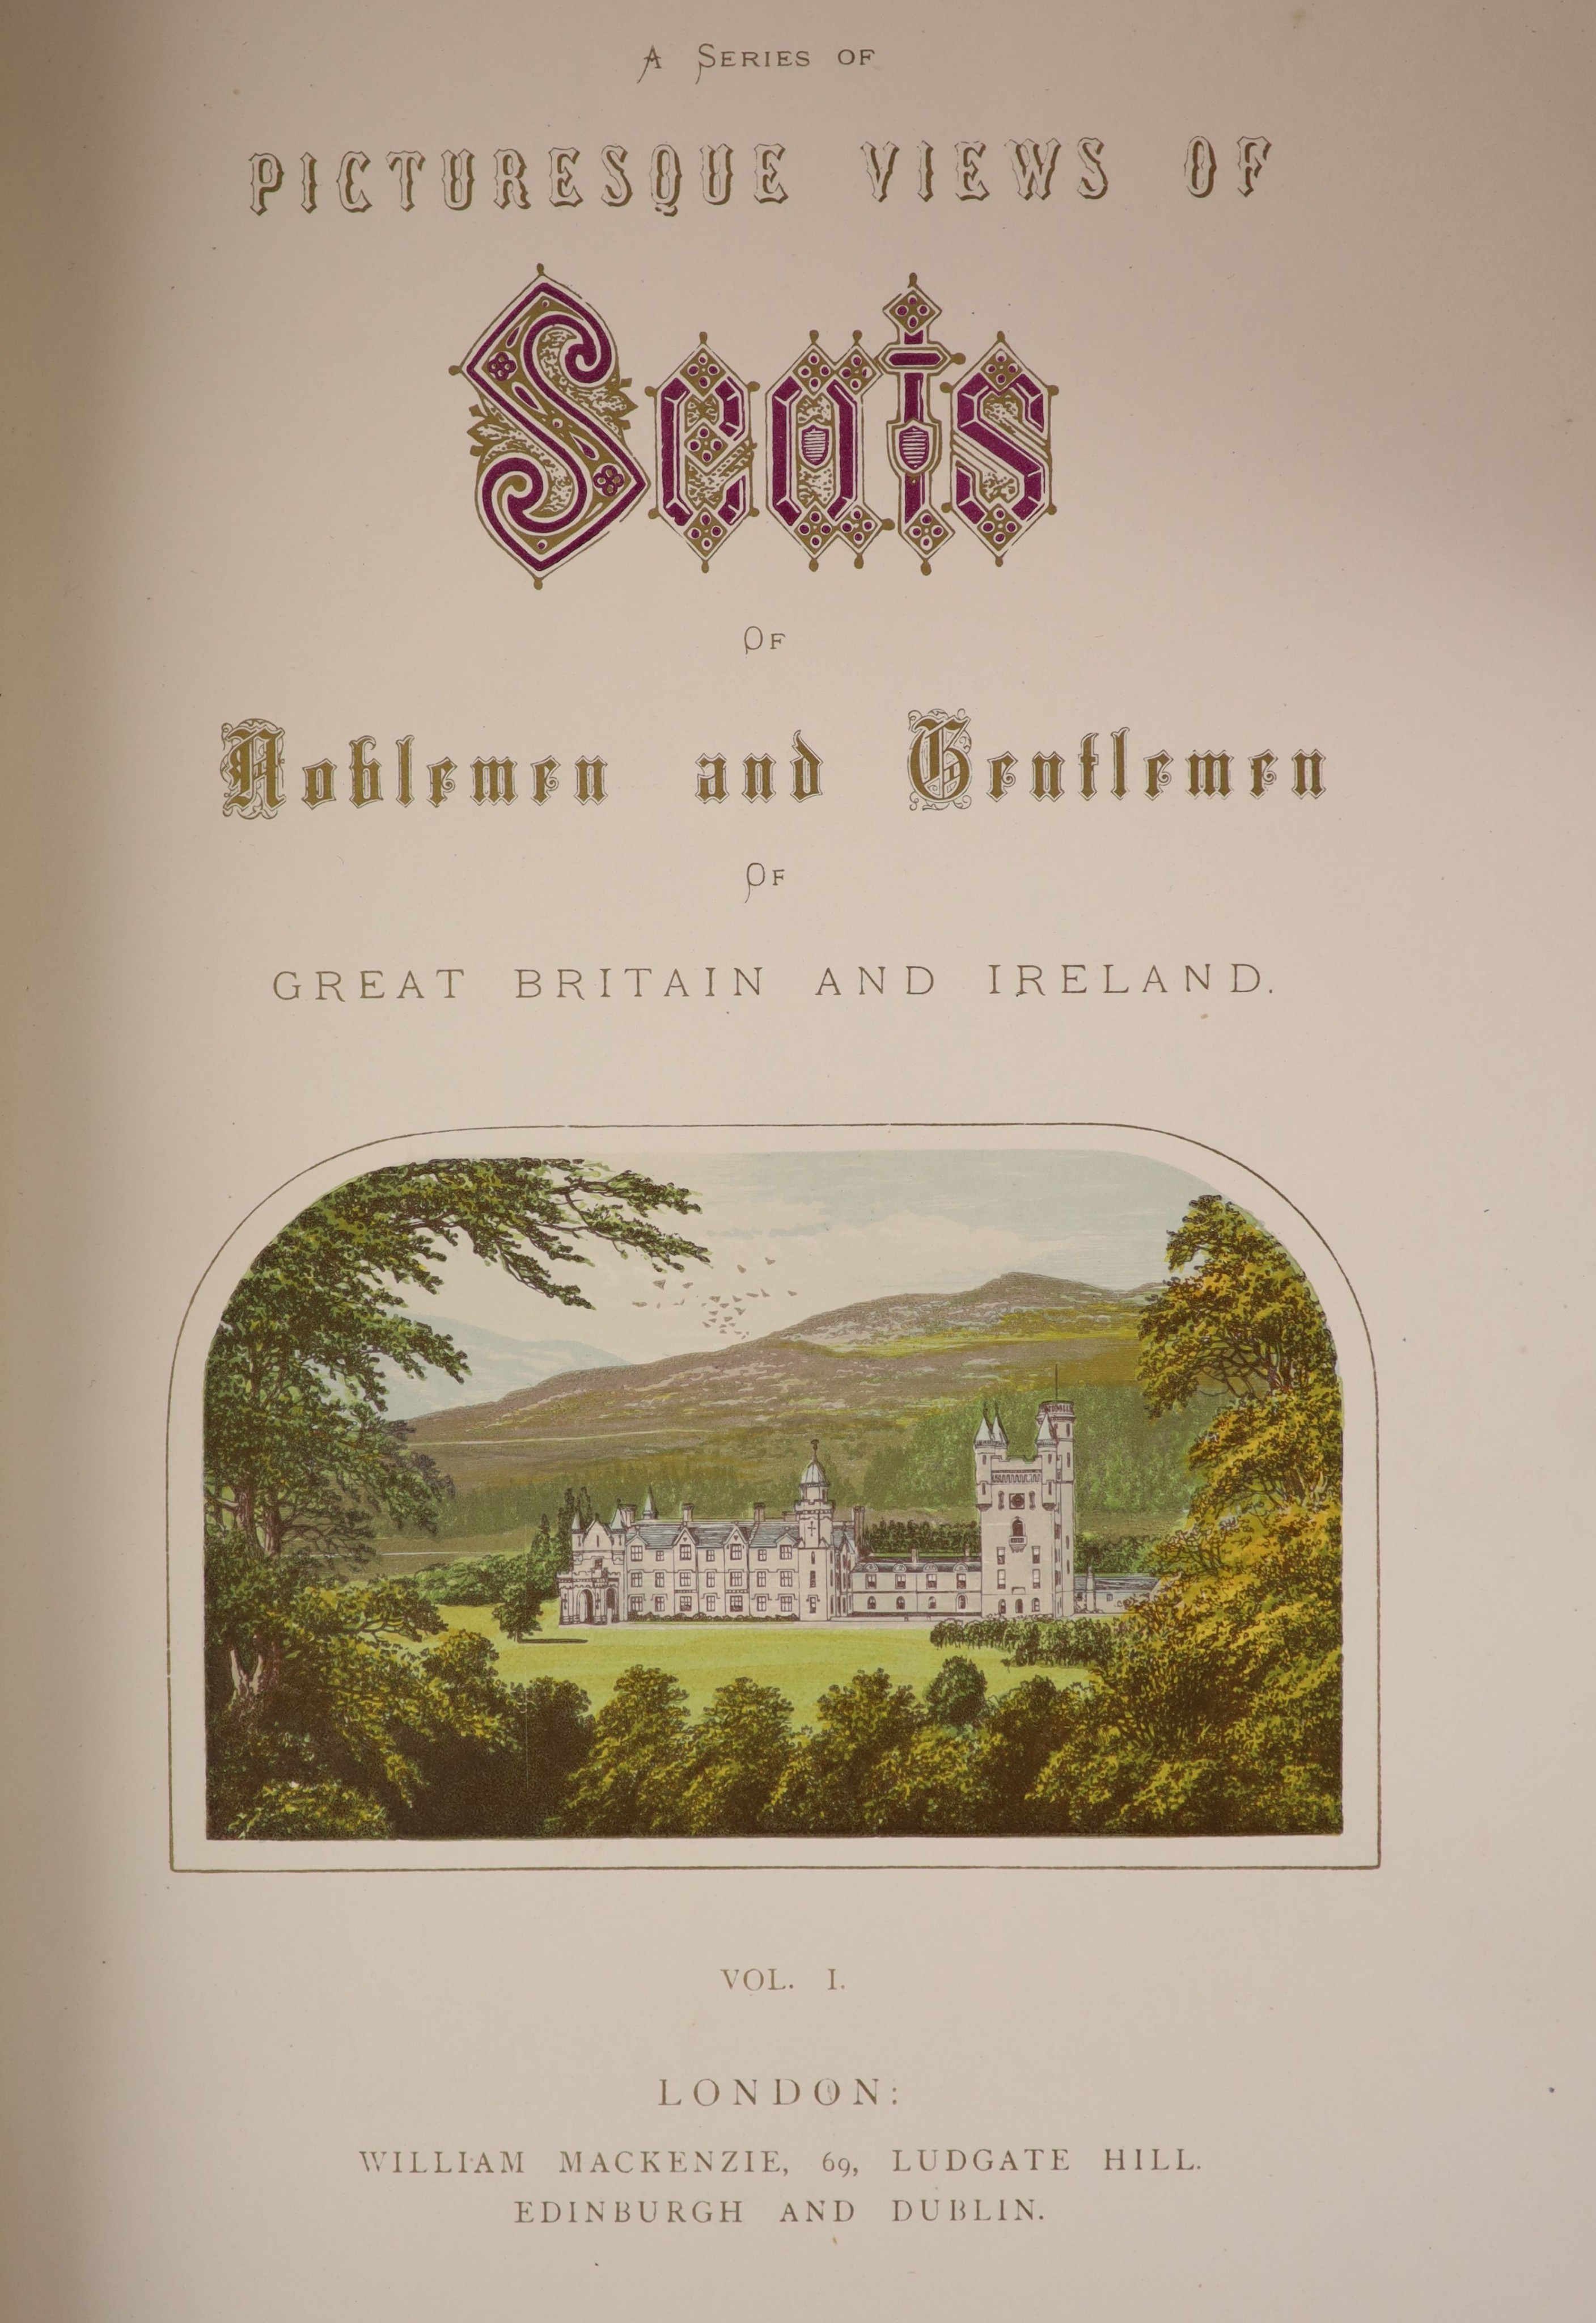 Morris, Rev. F.O [editor] - A Series of Picturesque Views of Seats of the Noblemen and Gentlemen of Great Britain and Ireland…Complete with 234 coloured plates (each with a guard) and 6, coloured, title page vignettes. L